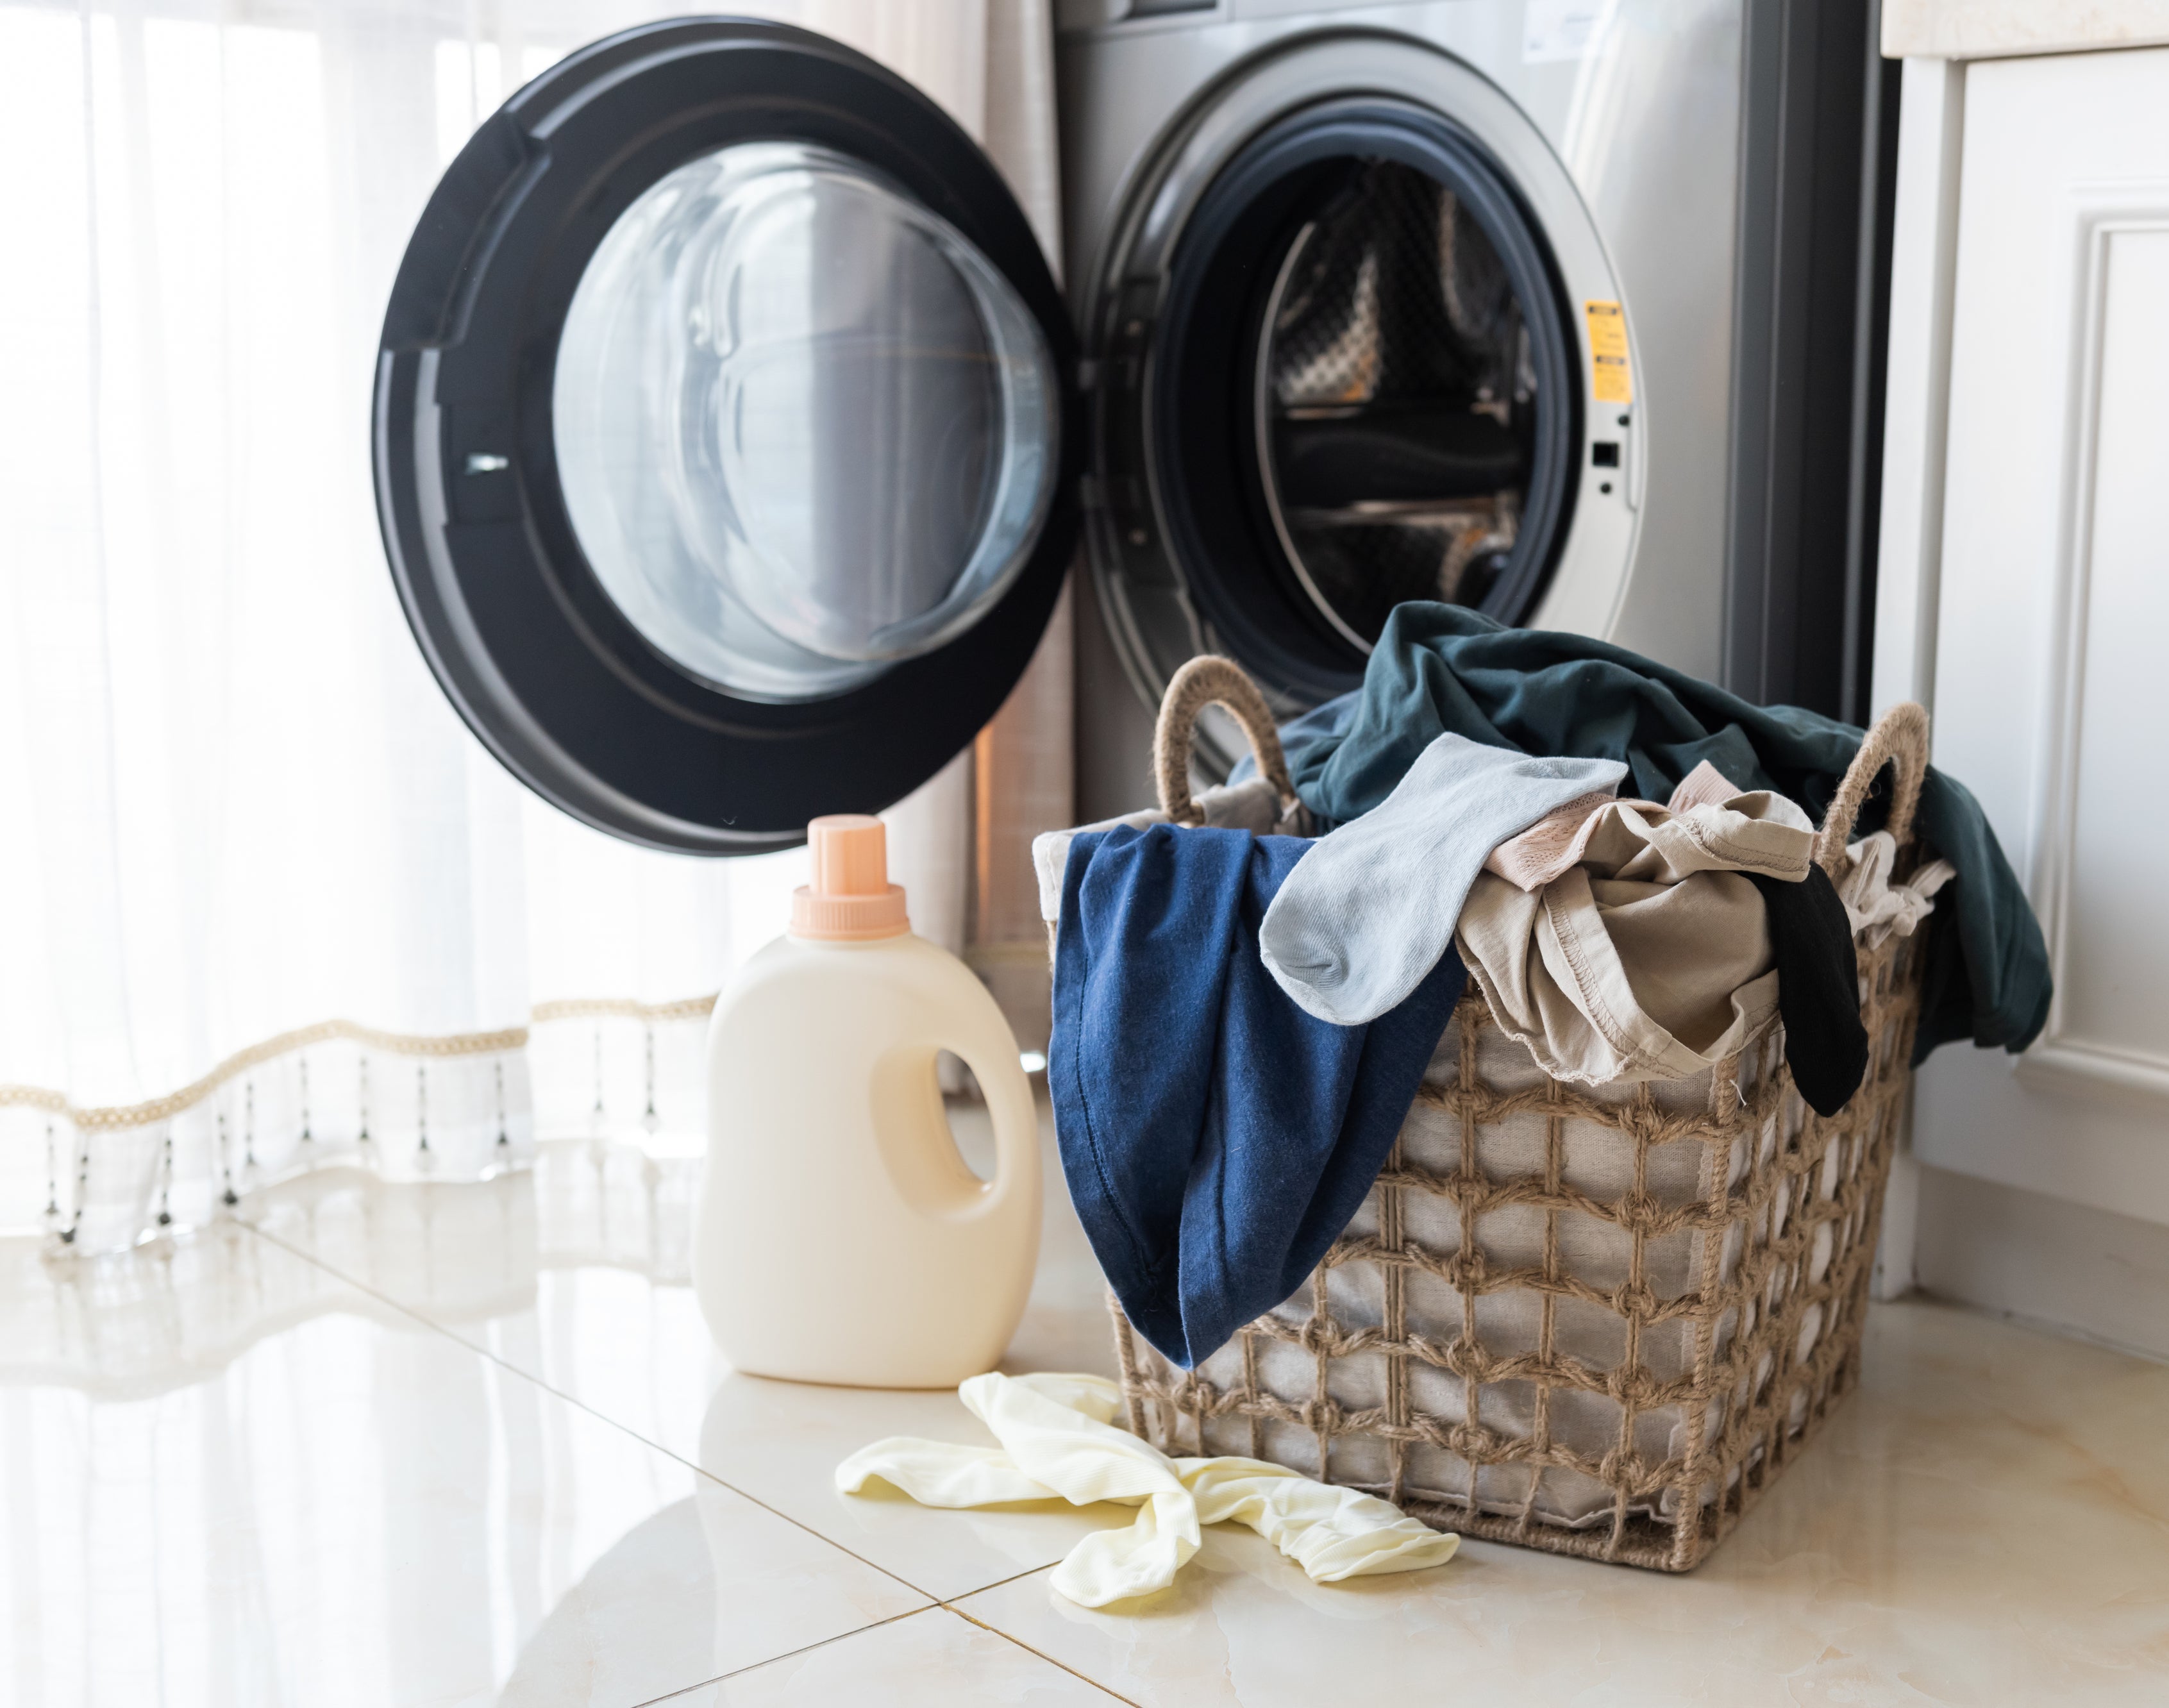 A basket of laundry in front of a washing machine